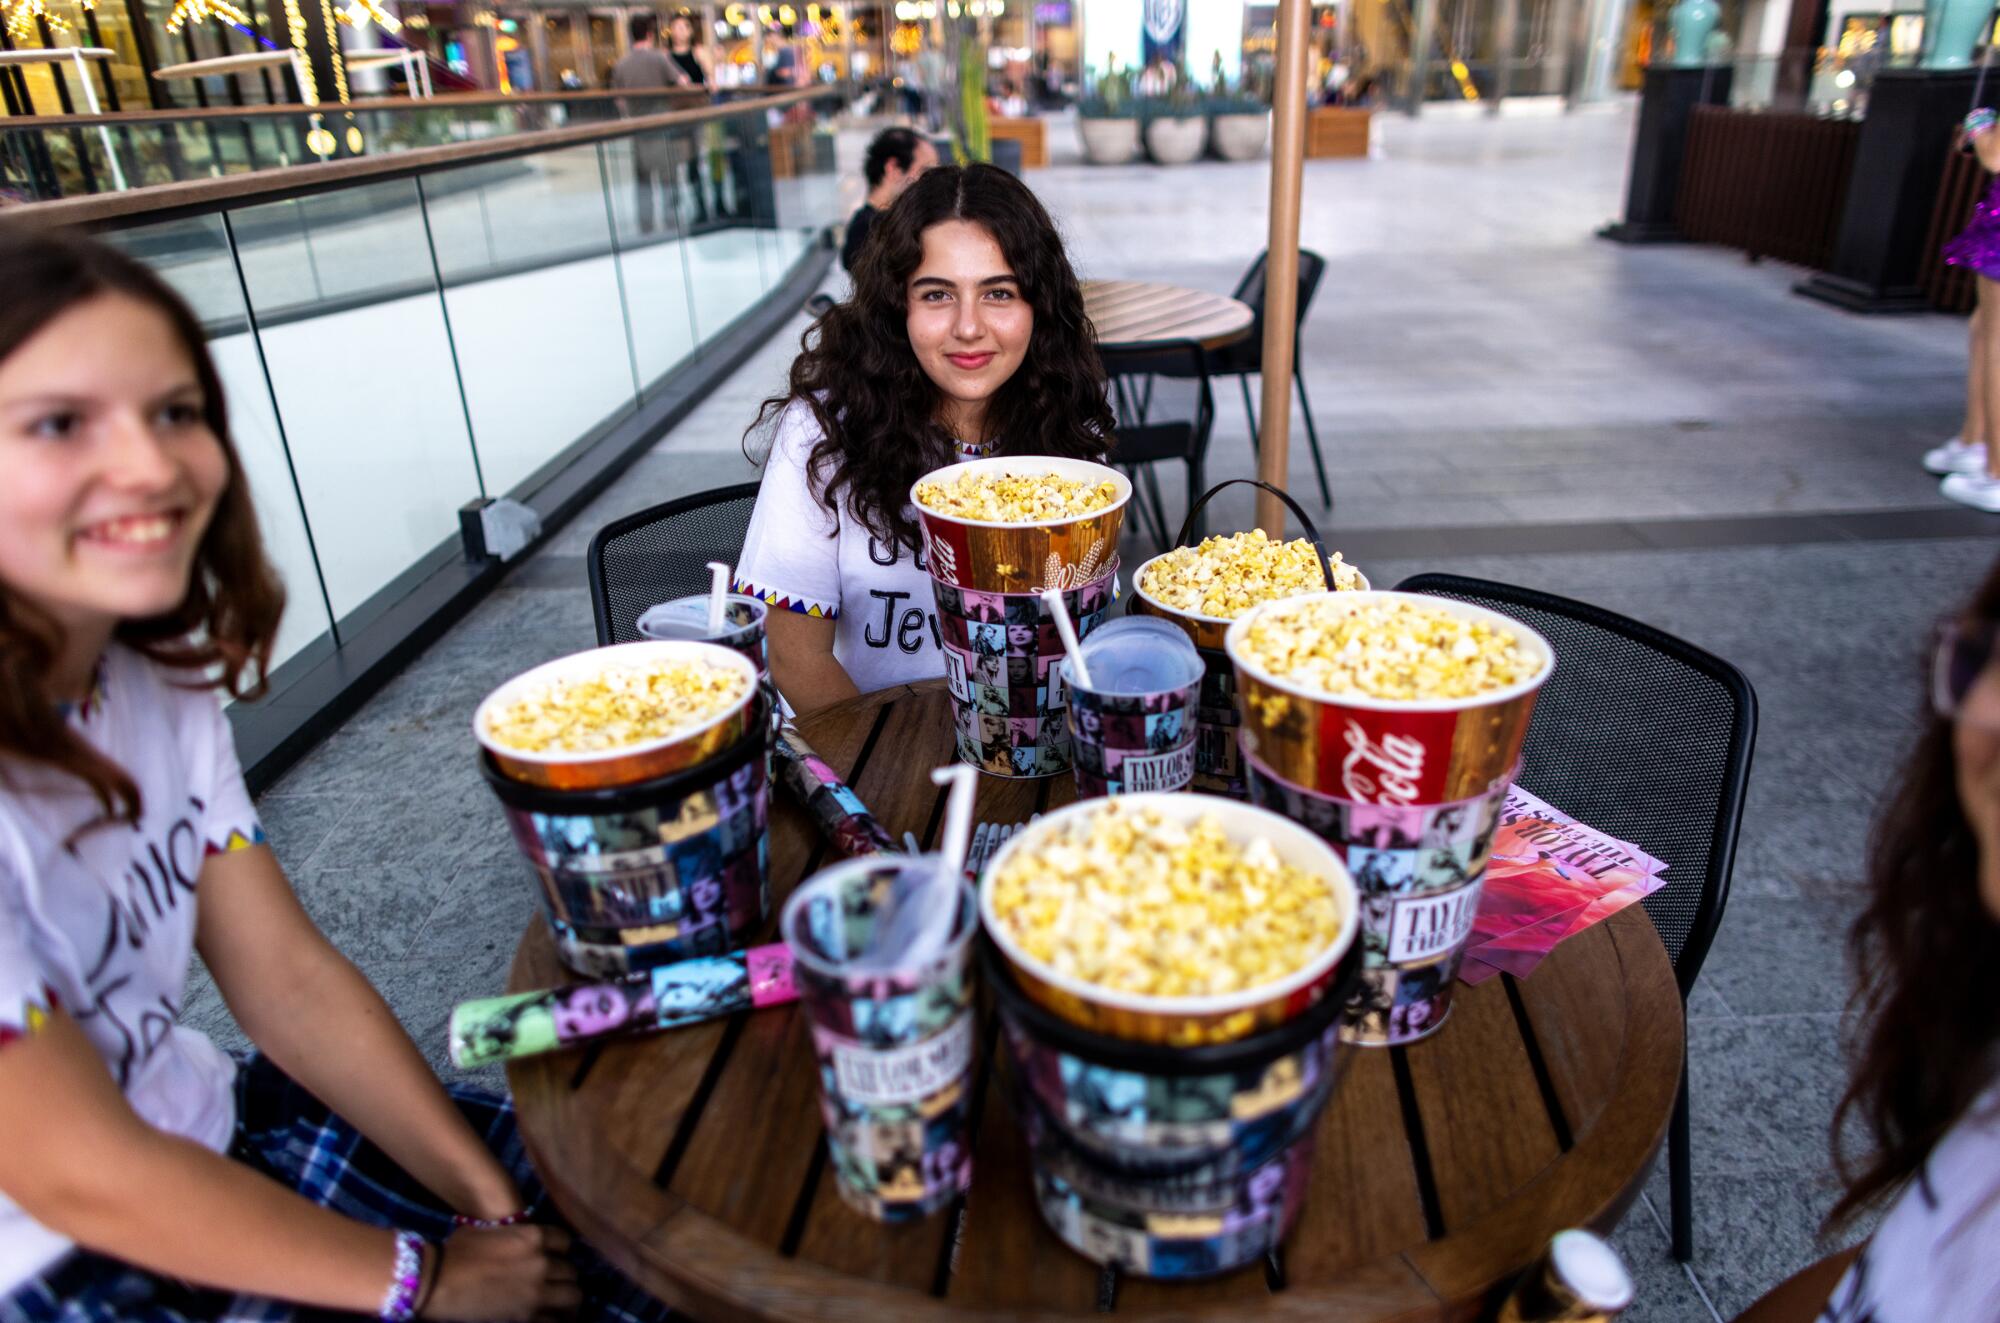 Los Angeles teens arrived an hour early so they stocked up on popcorn before attending the Taylor Swift concert 